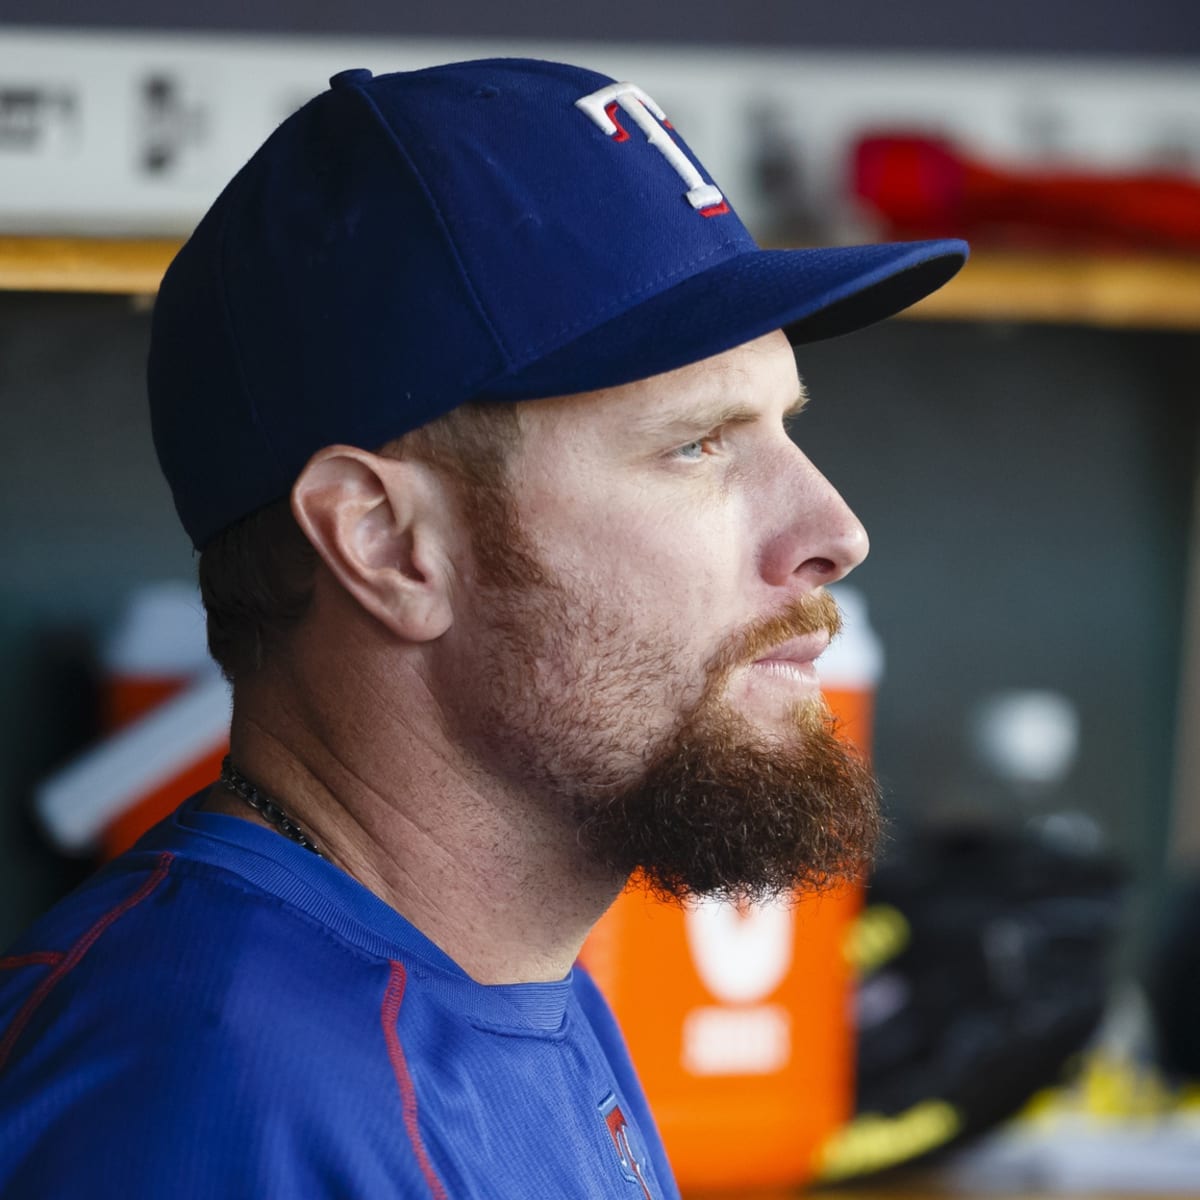 Josh Hamilton indicted on felony count of injury to a child